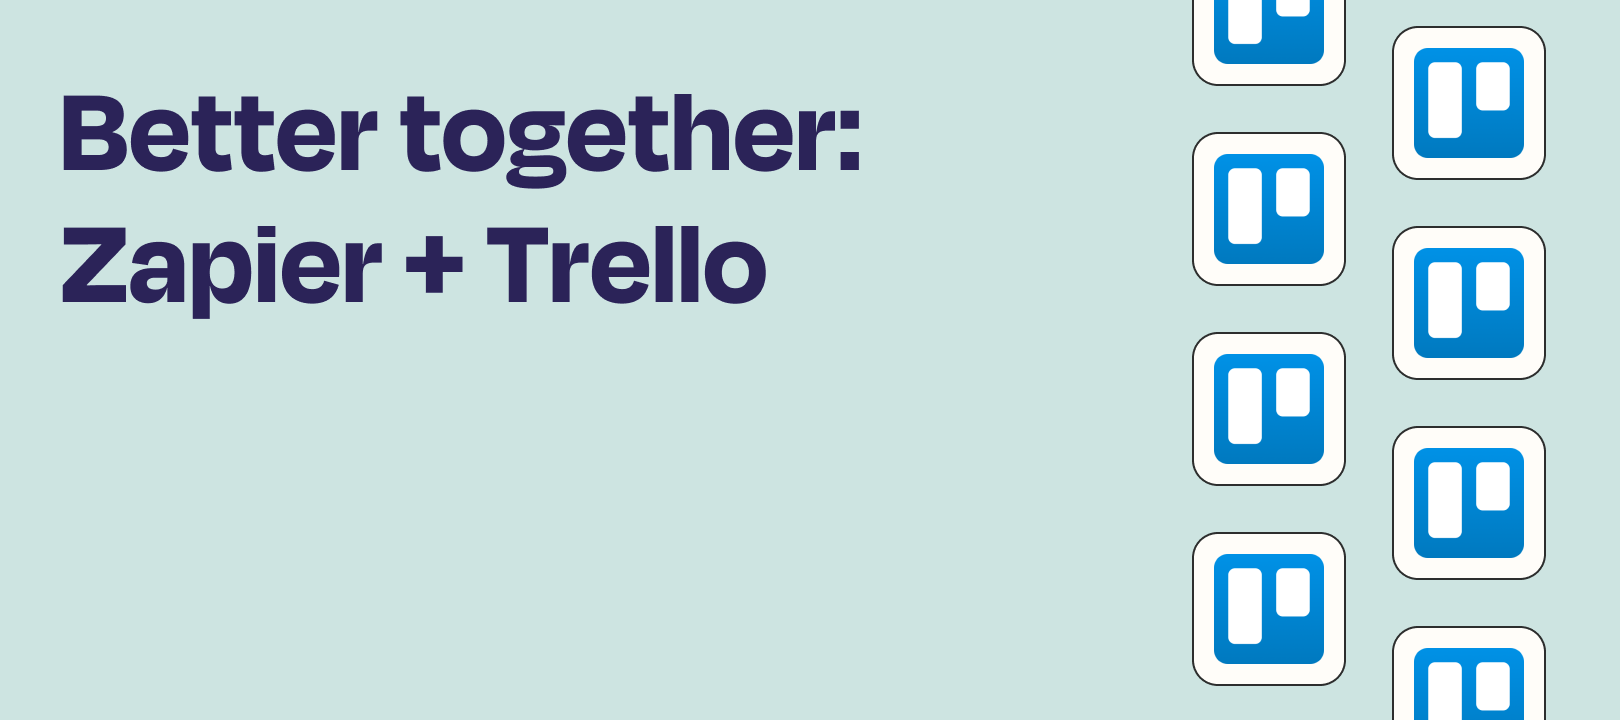 5 ways that Zapier and Trello are better together